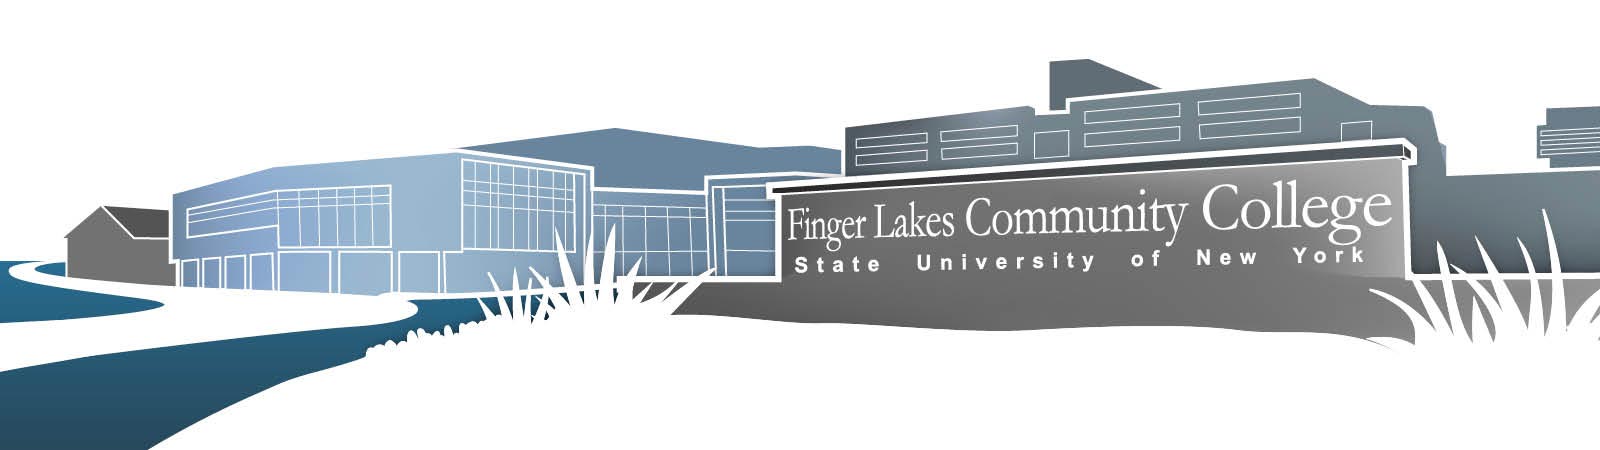 illustration of the main building at the Canandaigua campus. The Finger Lakes Community College, State University of New York sign in foreground